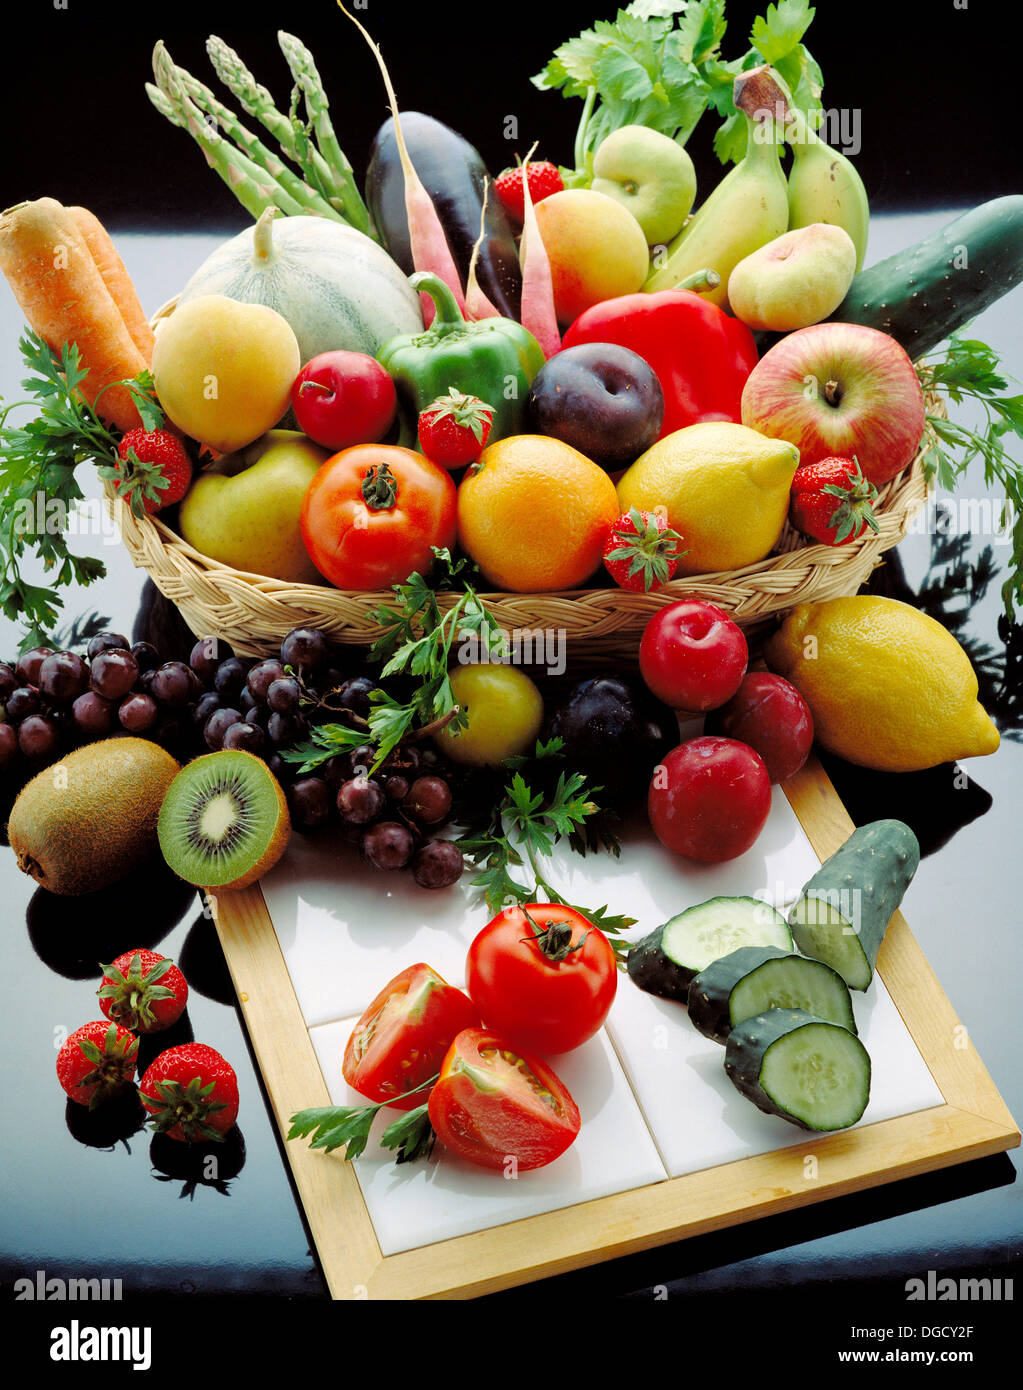 Fruits and vegetables Stock Photo